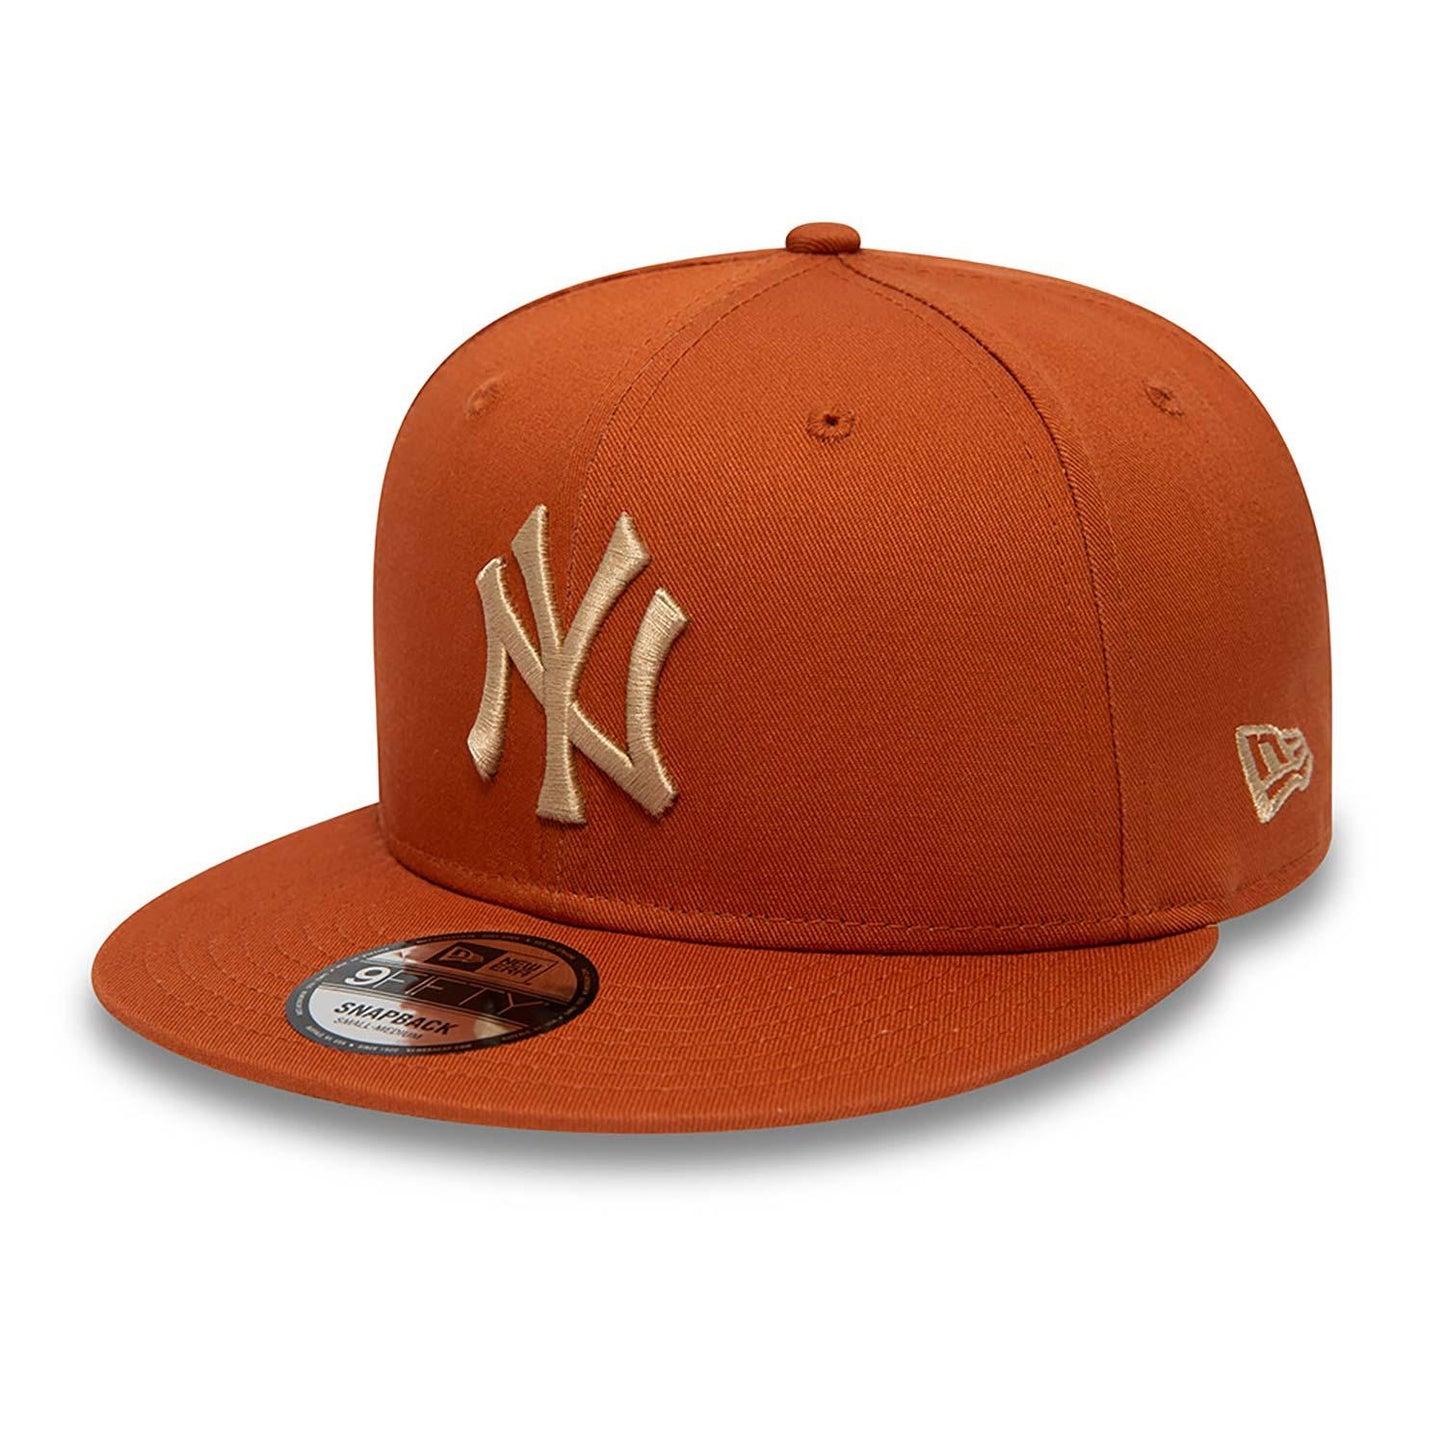 NEW ERA 9FIFTY SIDE PATCH NEW YORK YANKEES RUST SNAPBACK